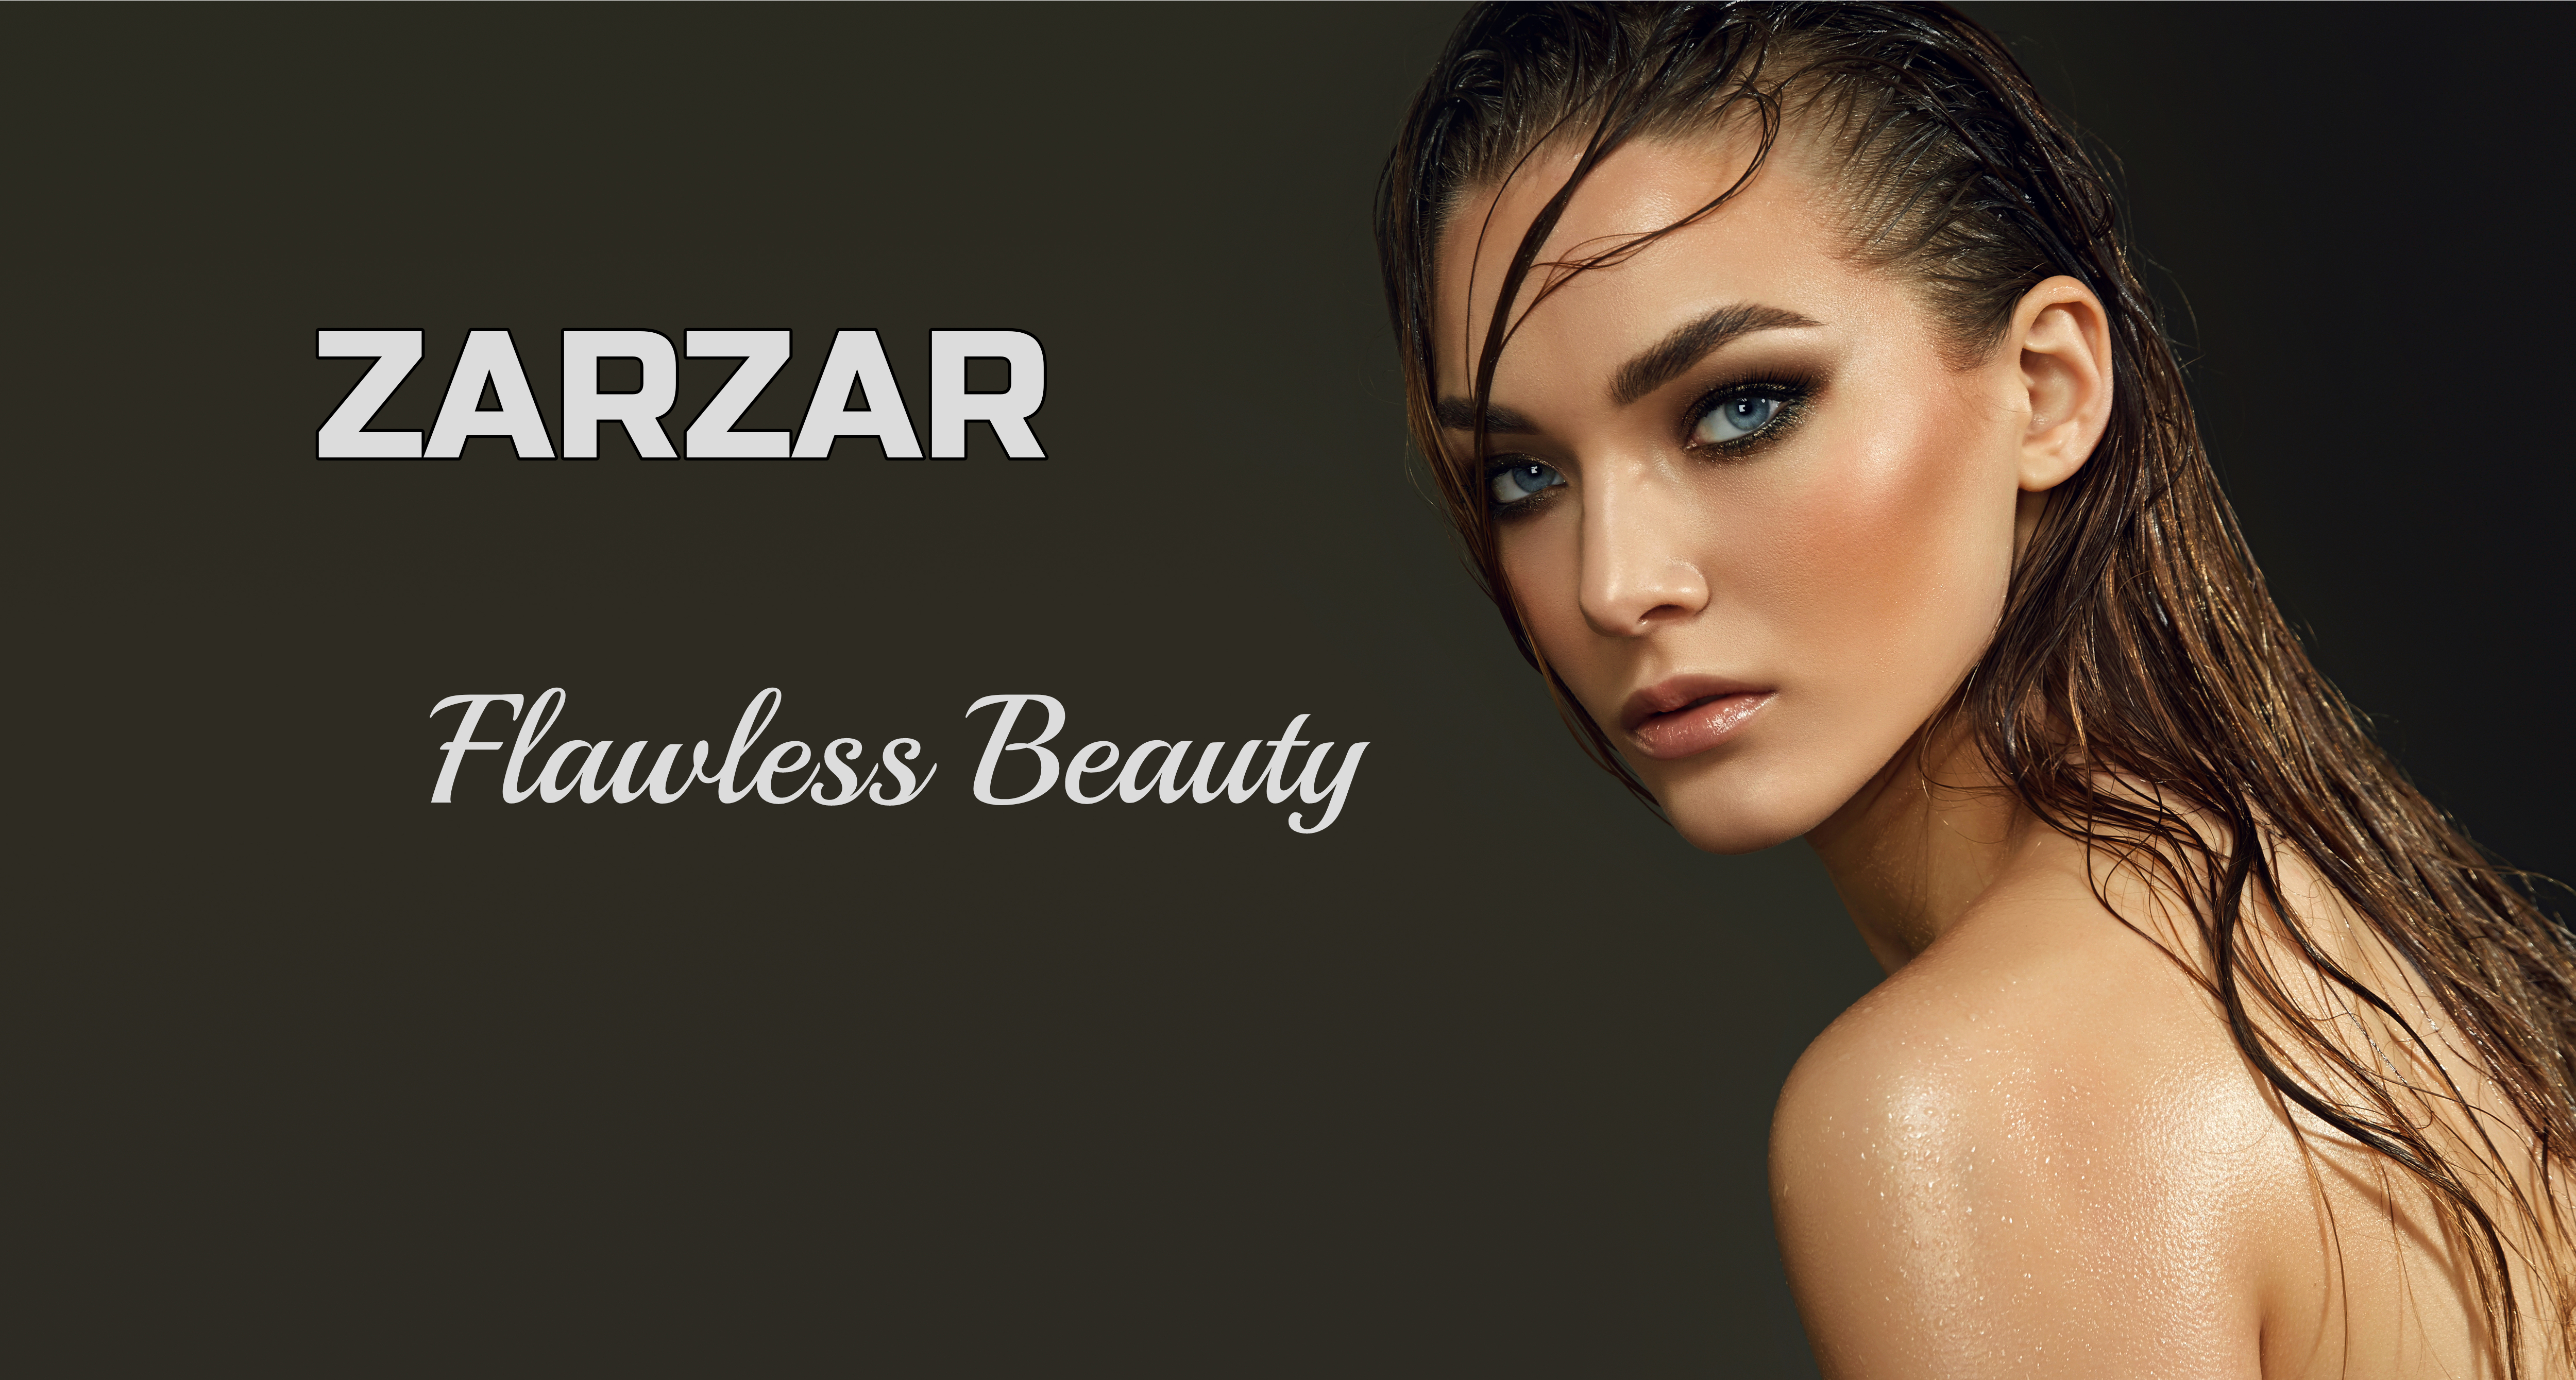 ZARZAR FASHION Beauty Products For Women. Luxury Hair Care & Luxury Makeup. Luxury Cosmetics & Luxury Skincare Products For Women.